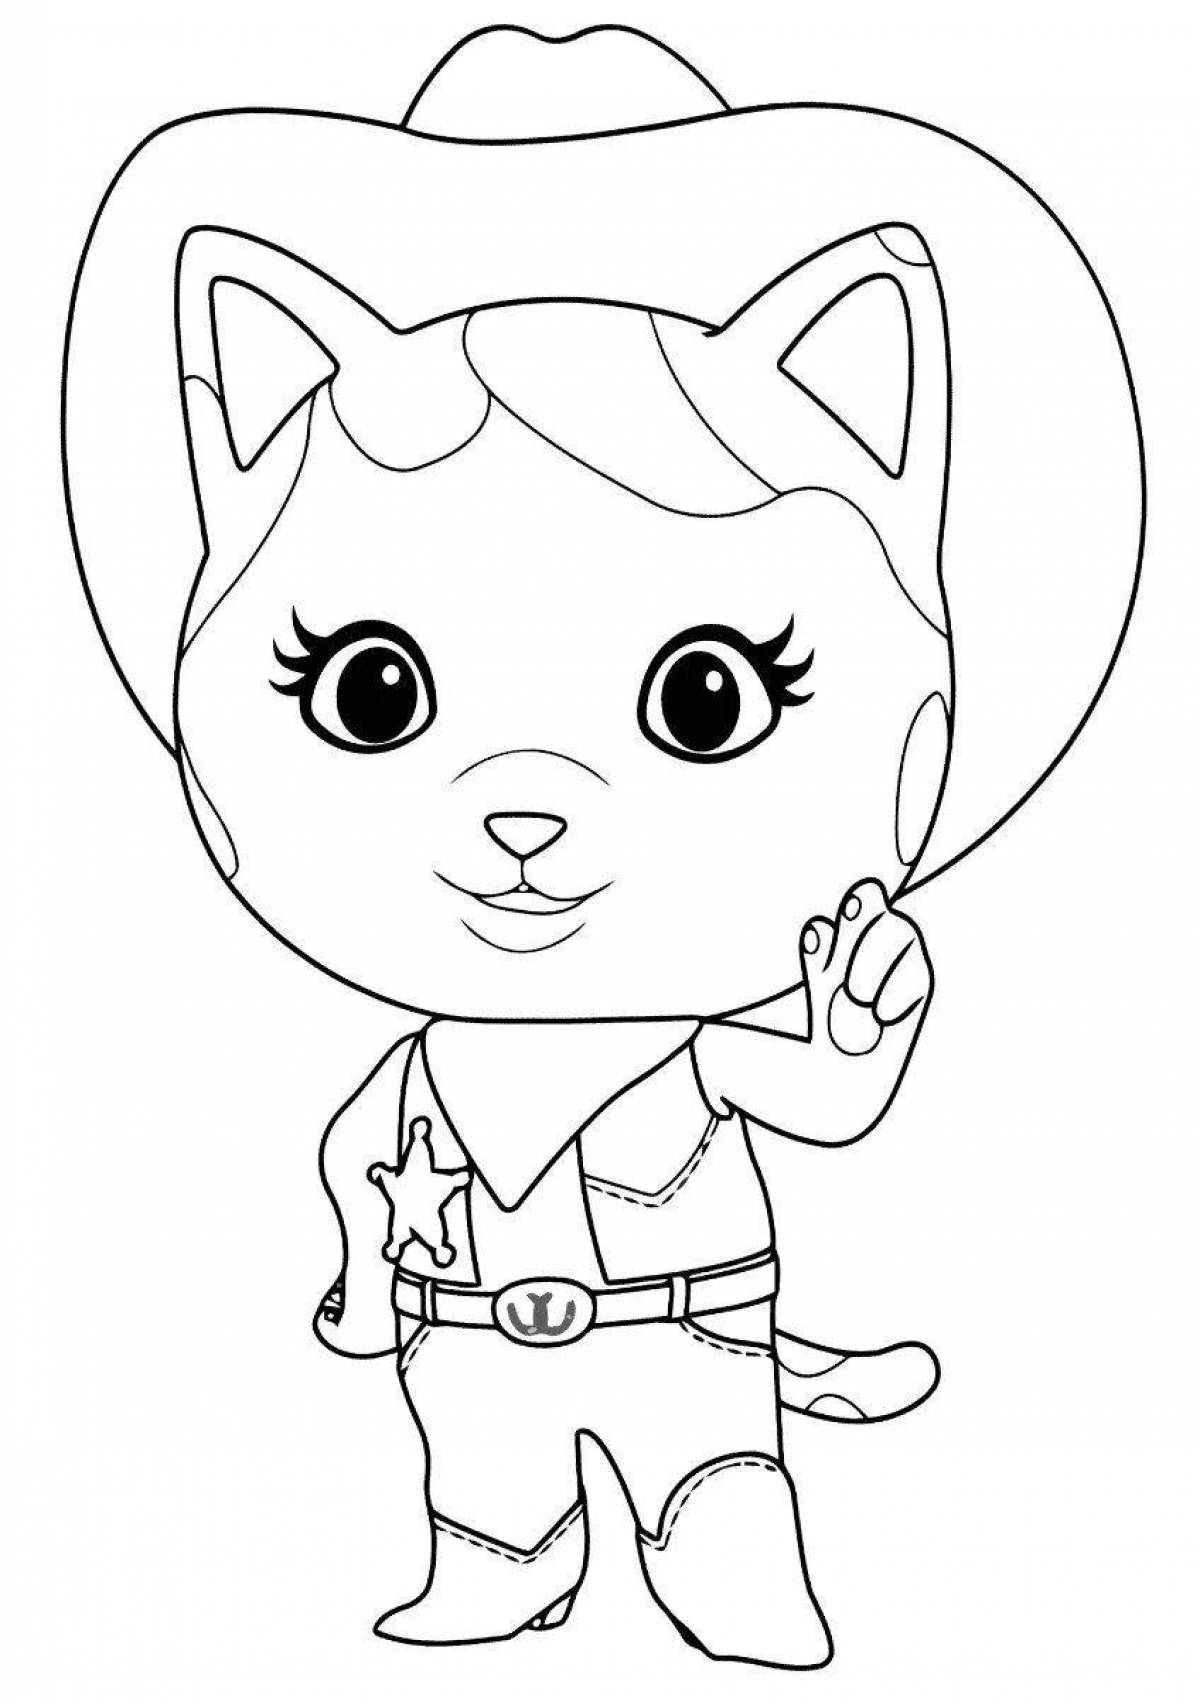 Angela kitty coloring book filled with color